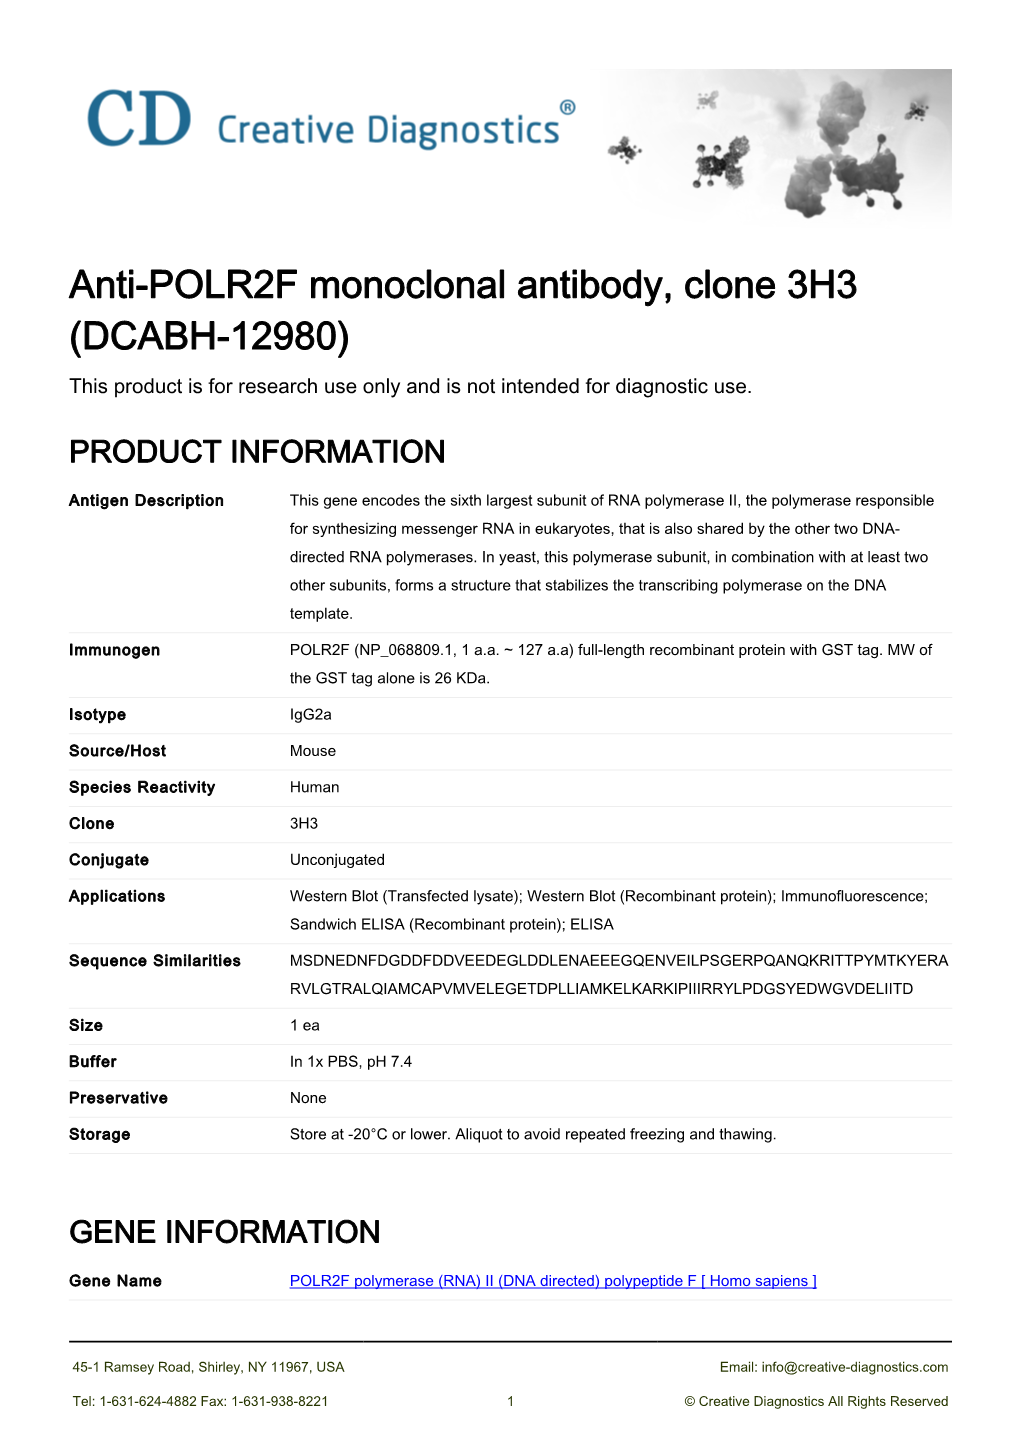 Anti-POLR2F Monoclonal Antibody, Clone 3H3 (DCABH-12980) This Product Is for Research Use Only and Is Not Intended for Diagnostic Use